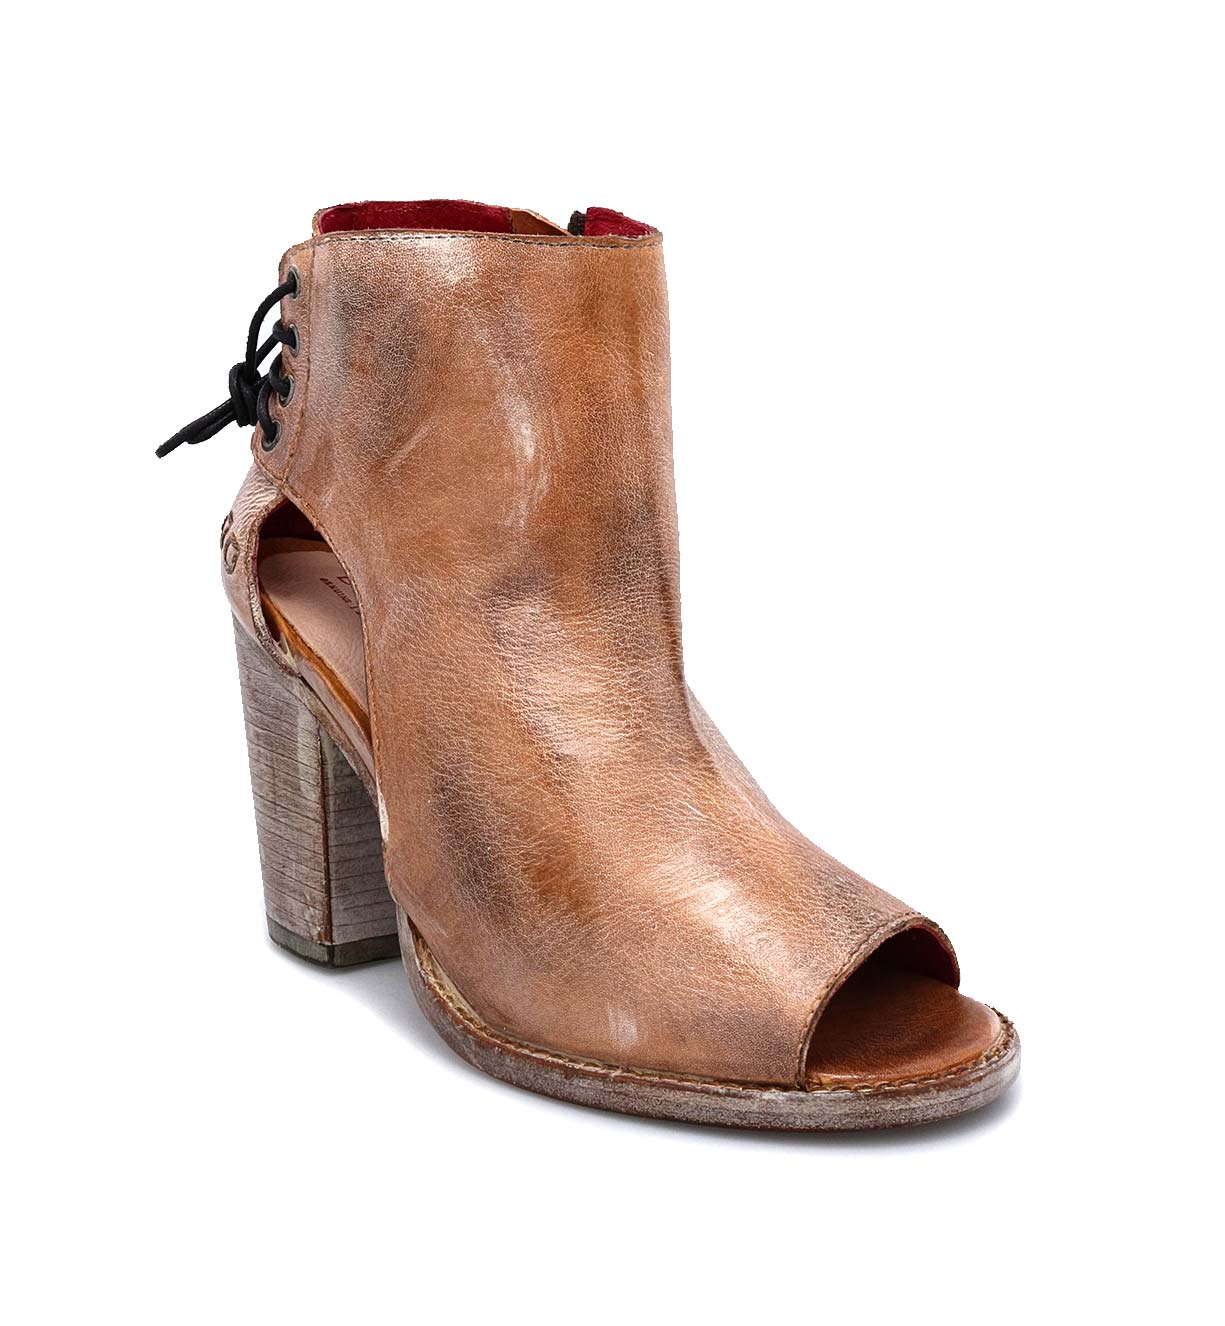 An Angelique ankle boot for women in tan leather from Bed Stu.